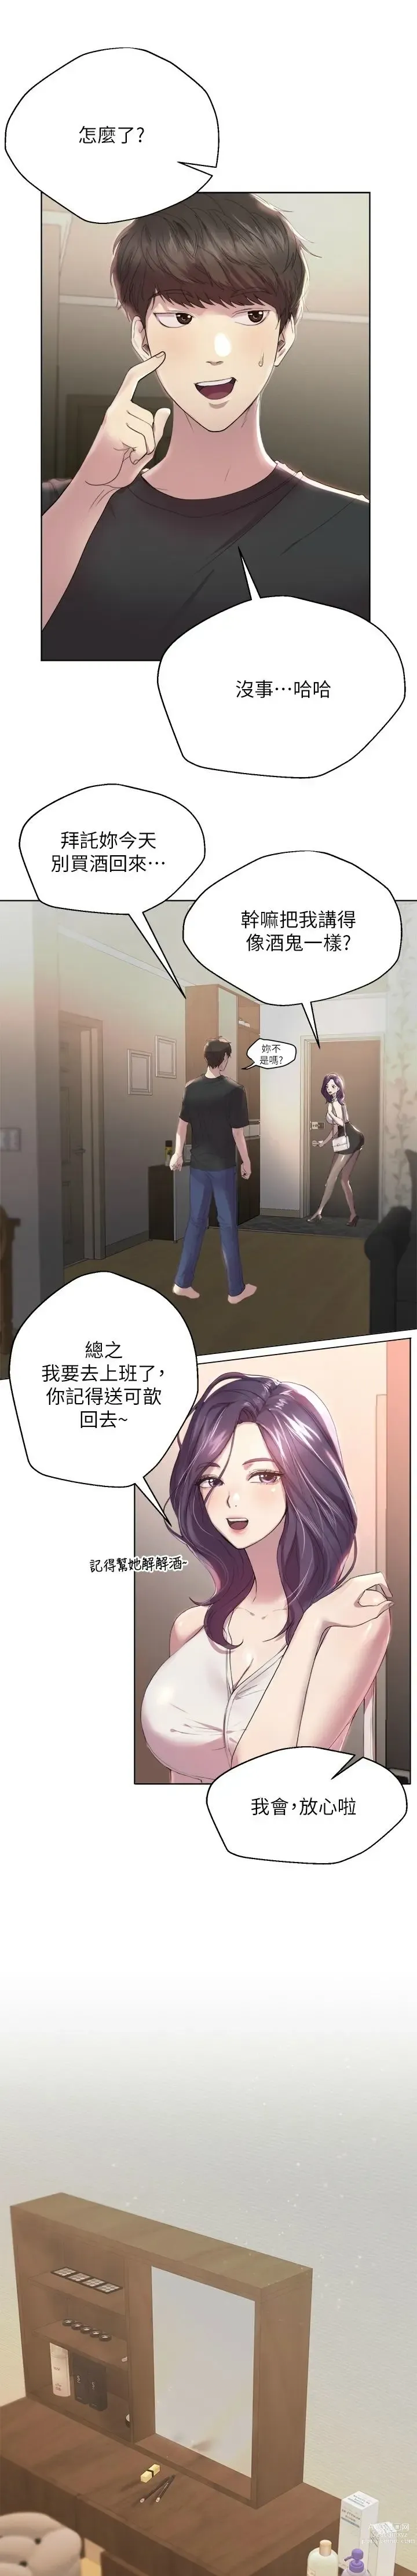 Page 14 of manga 姐姐们的调教／My Sister’s Friends